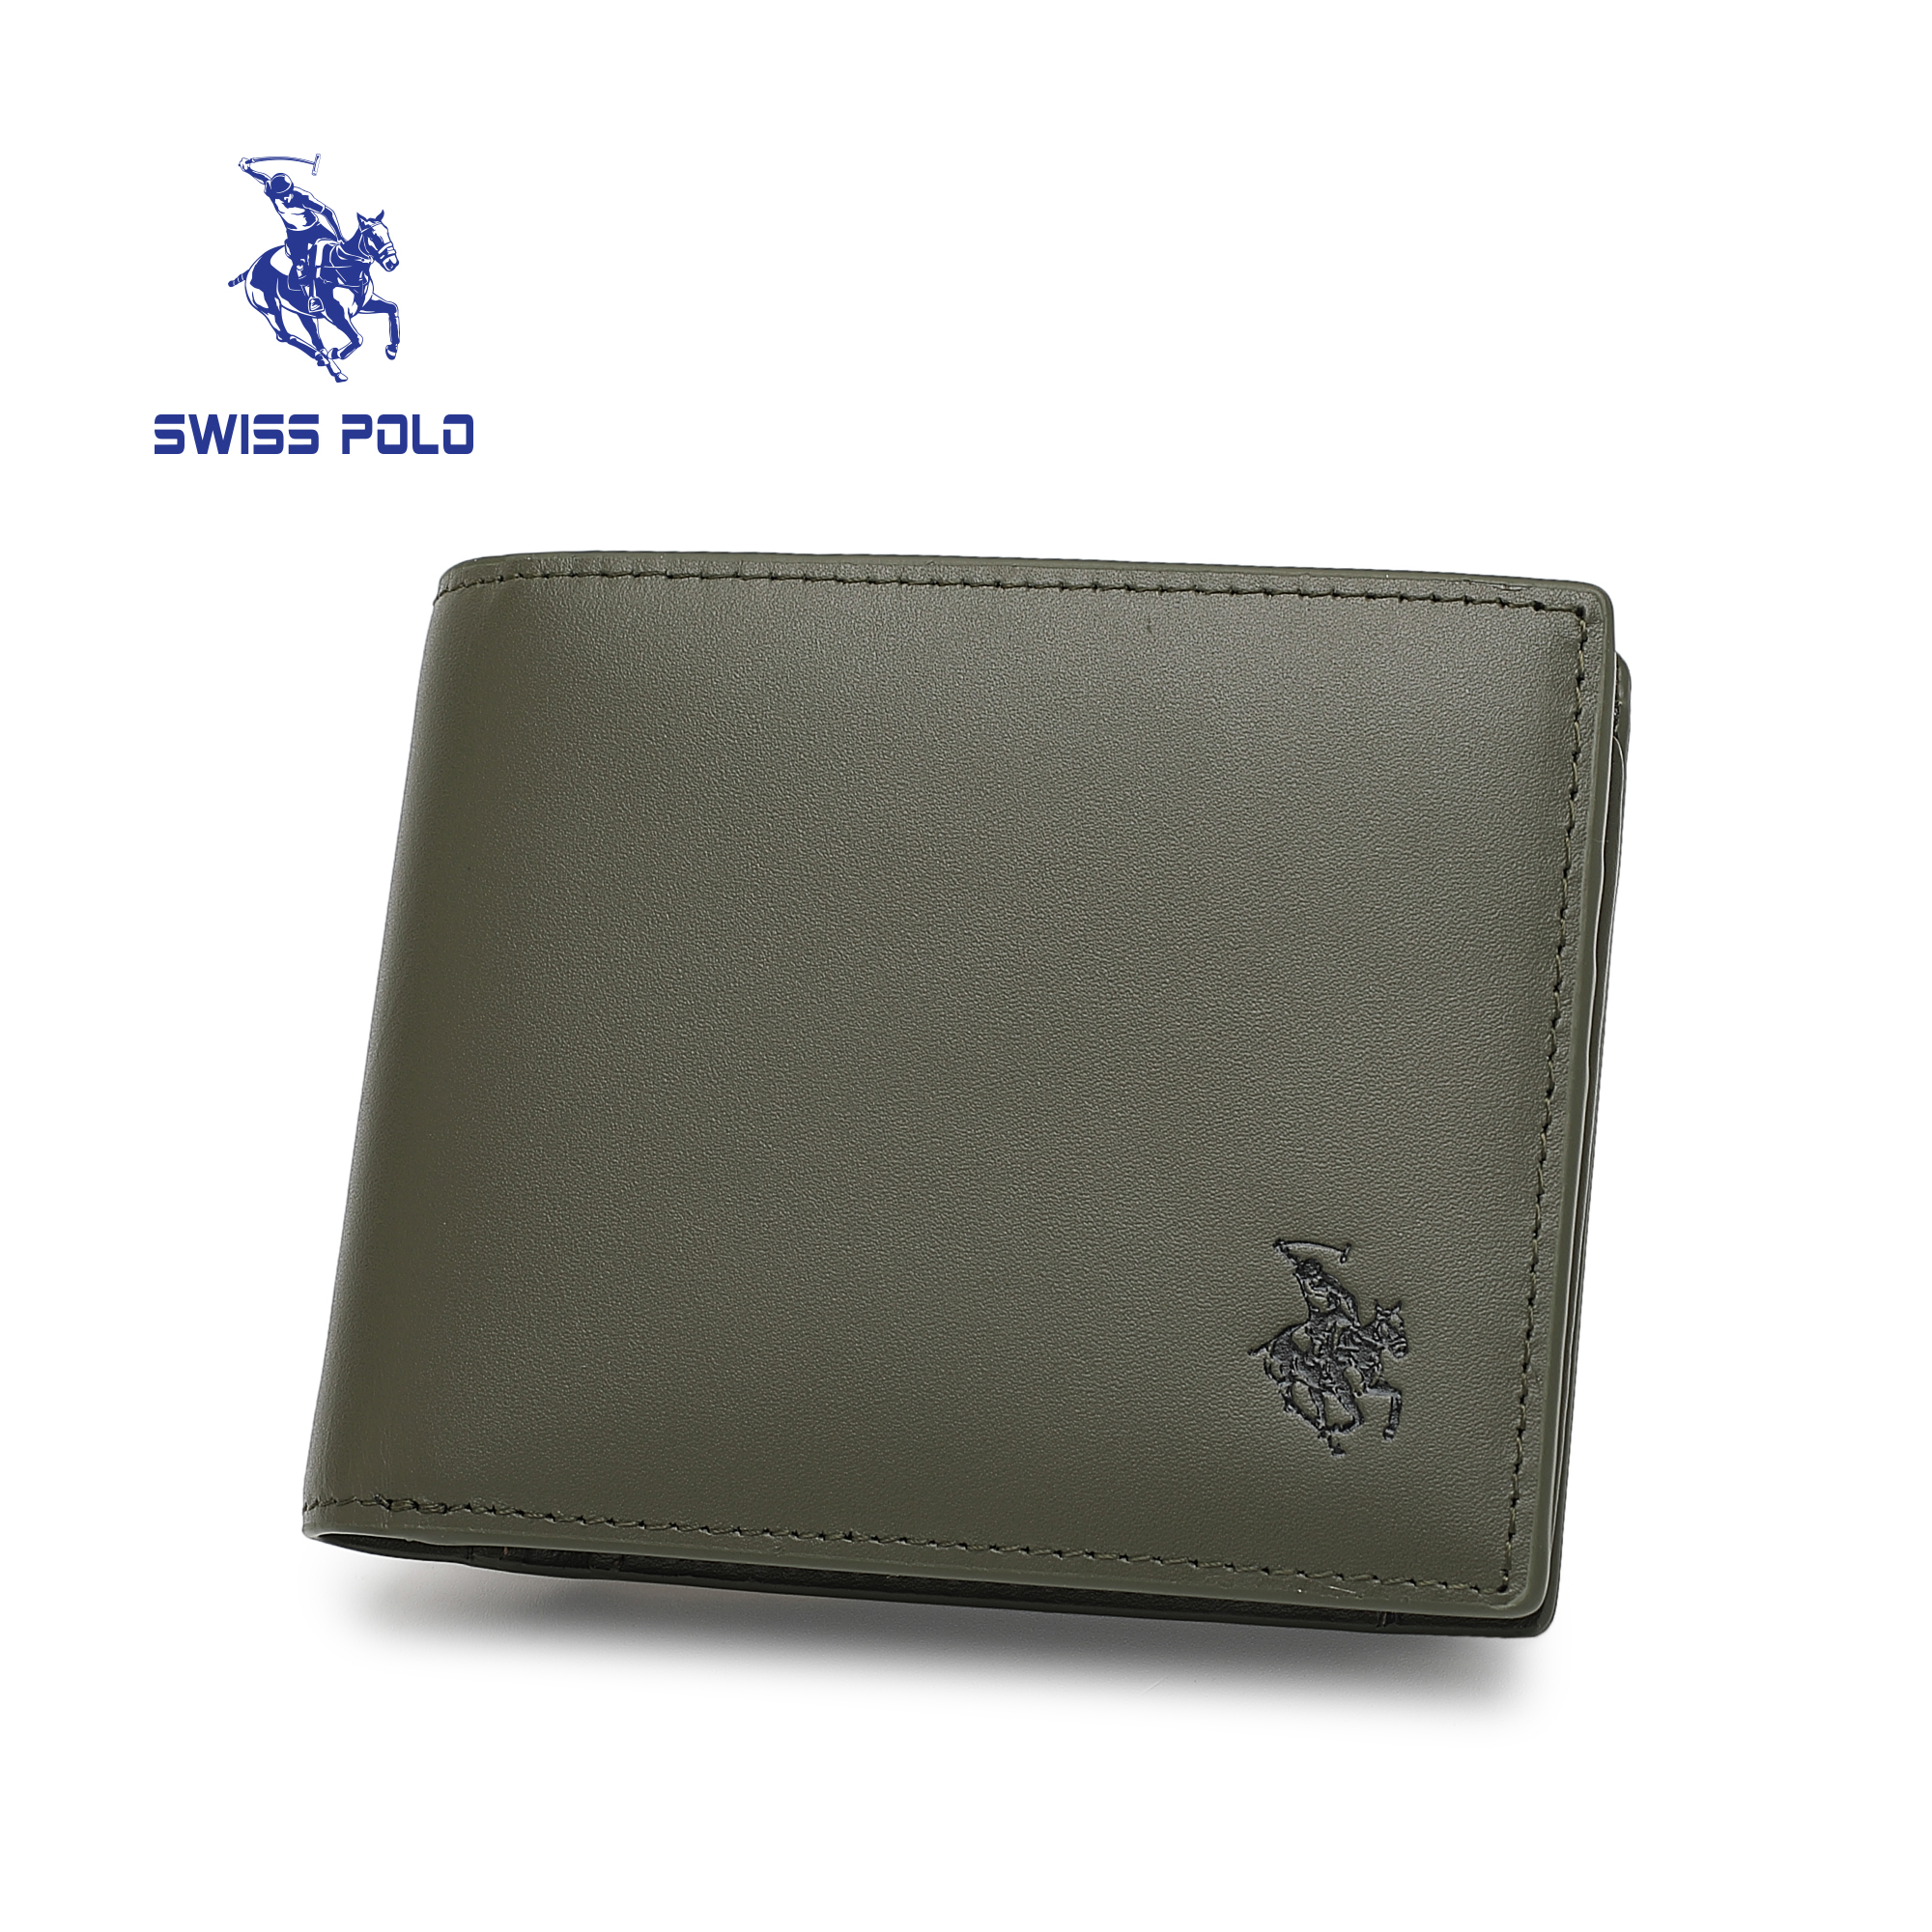 SWISS POLO Genuine Leather RFID Short Wallet SW 176-4 ARMY GREEN